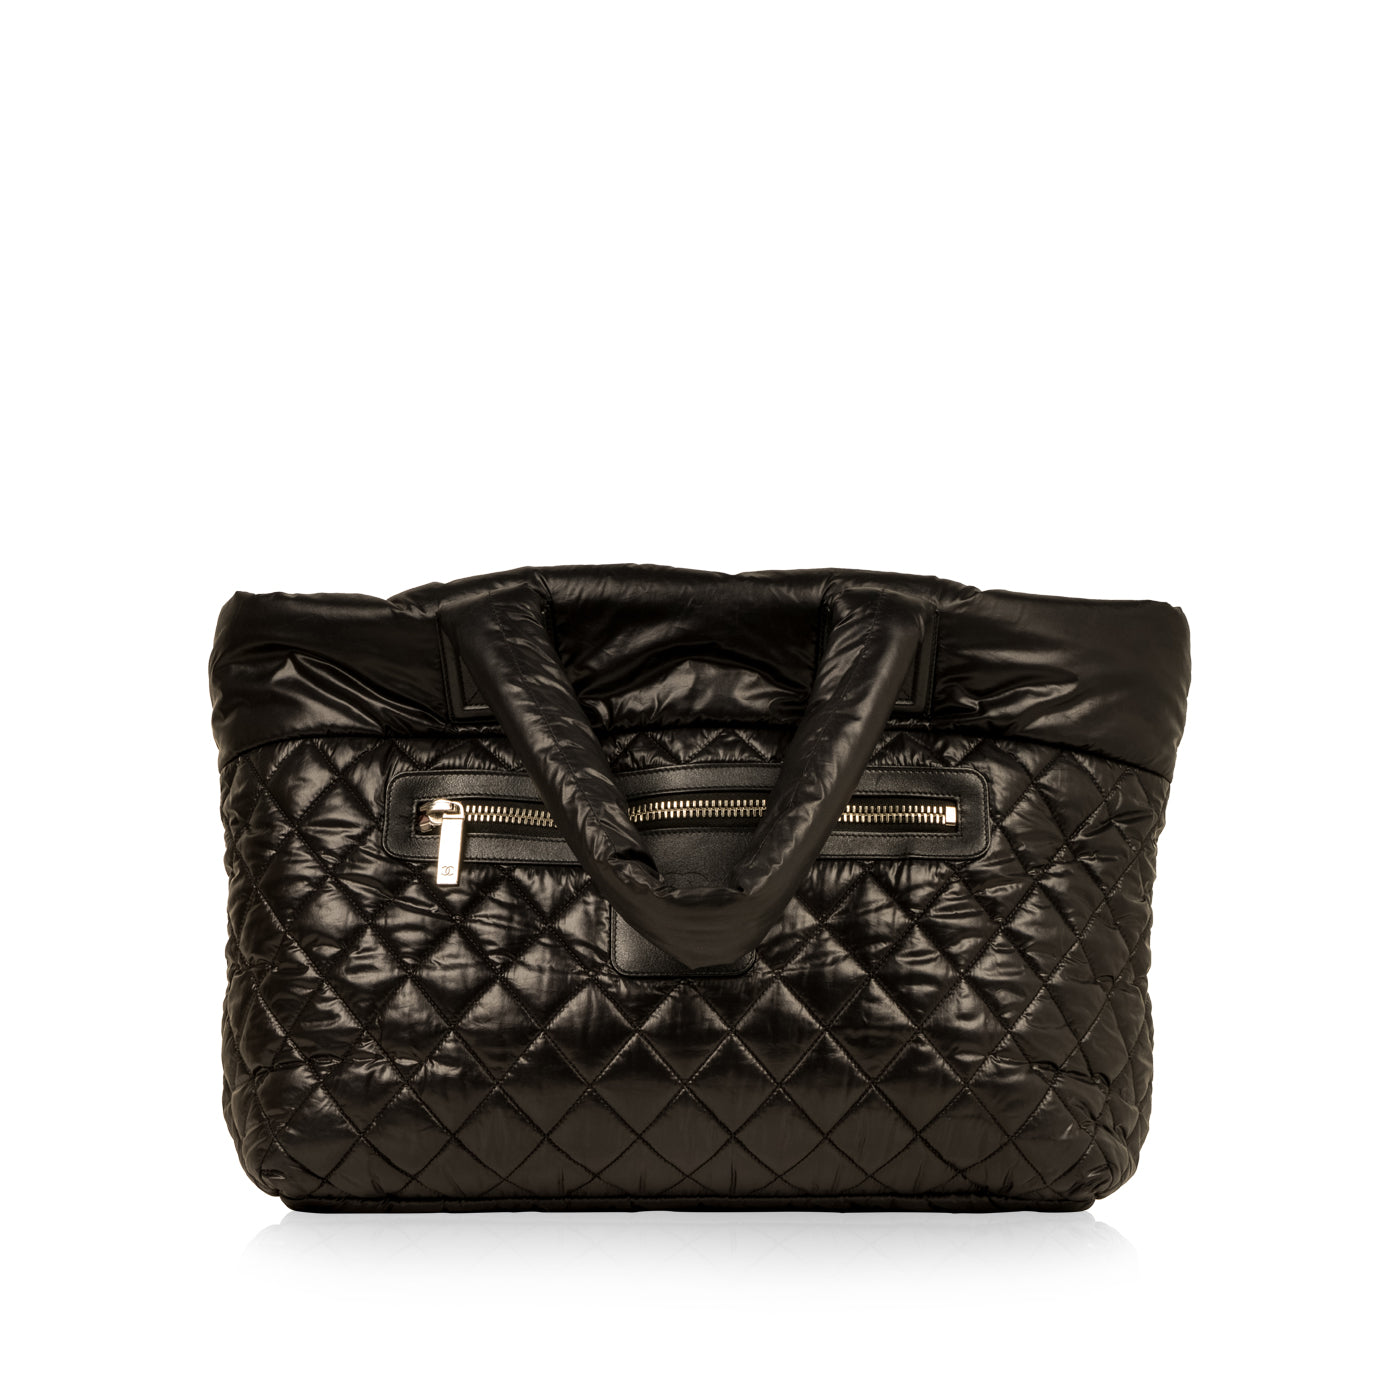 Chanel Coco Cocoon Black Synthetic Tote Bag (Pre-Owned)